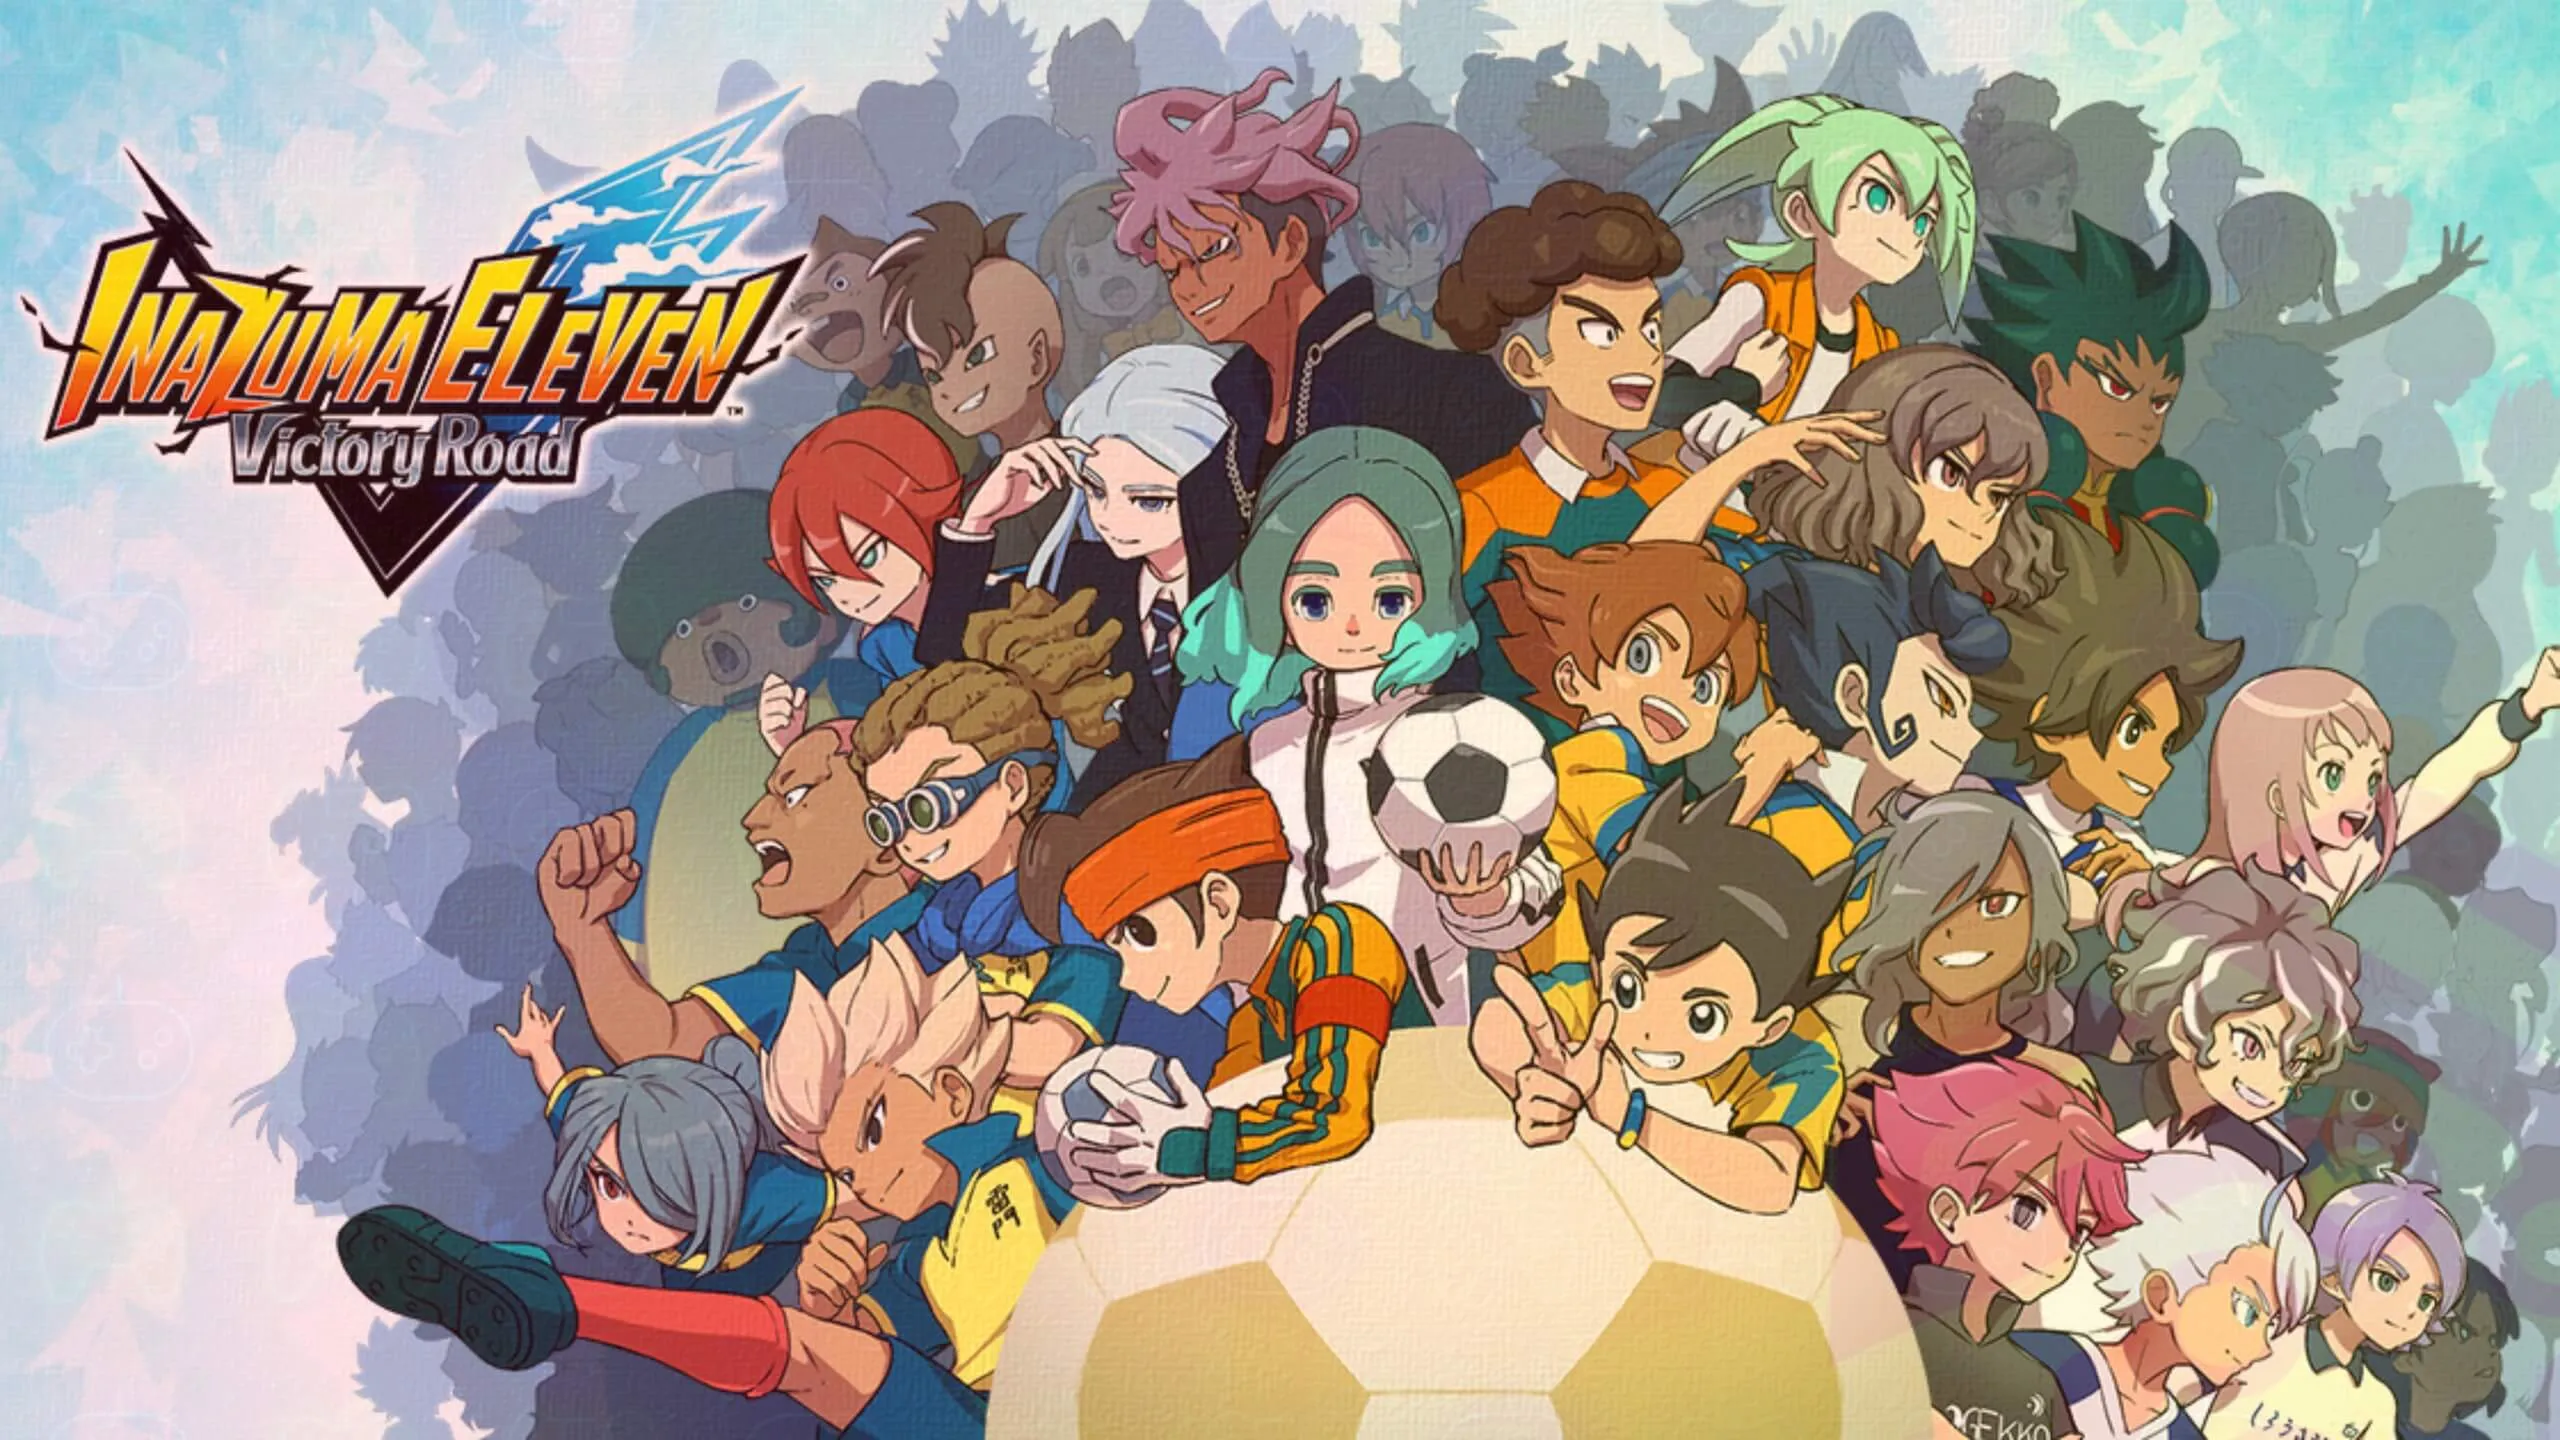 Key Art of Inazuma Victory Deries with game characters on the big ball